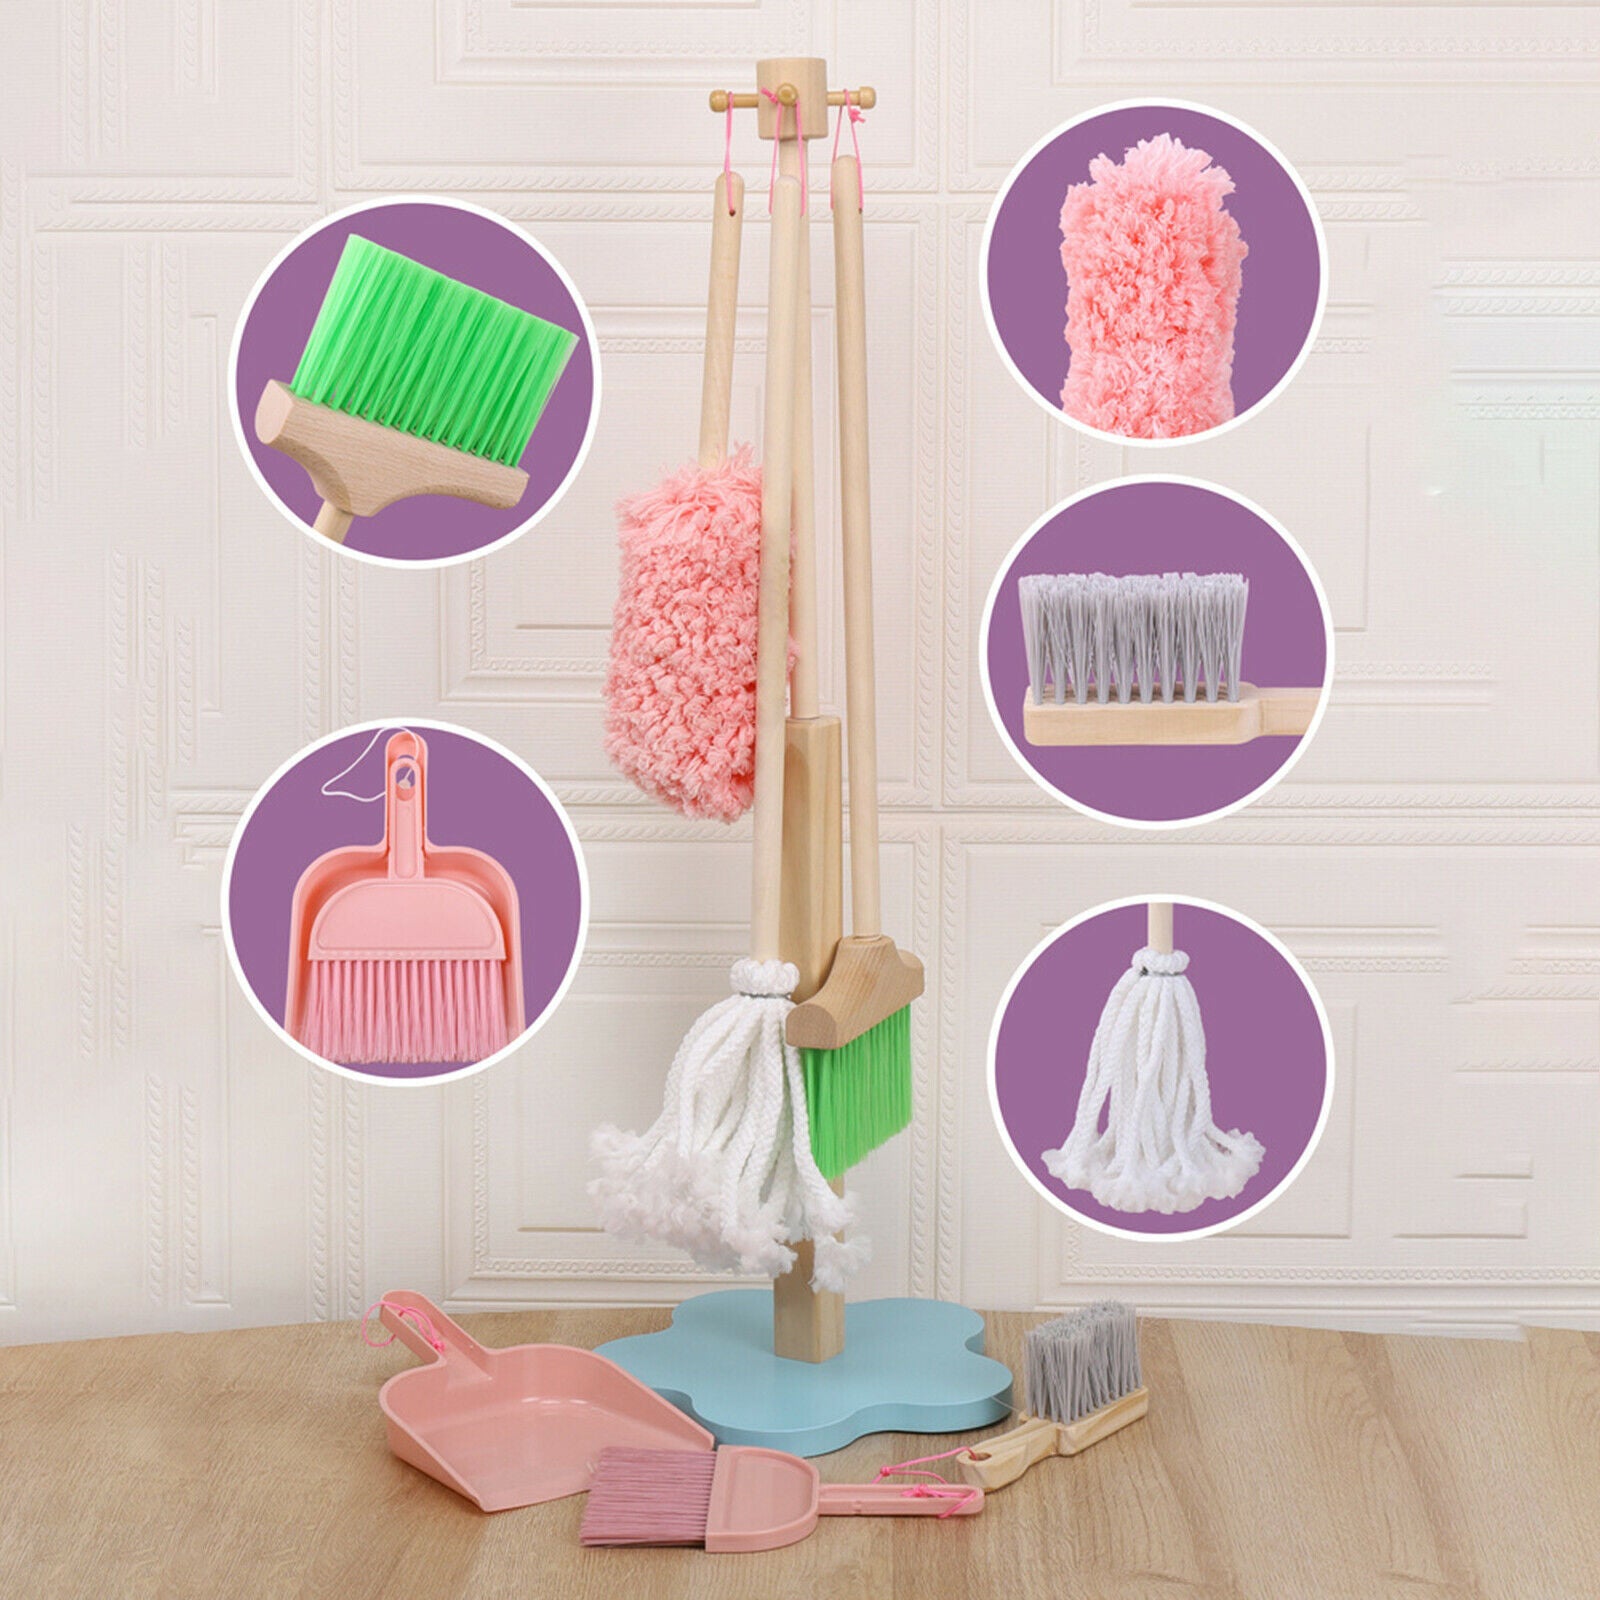 Safe Wooden Children Cleaning Tools Set for Kids Girls Boys Housekeeping